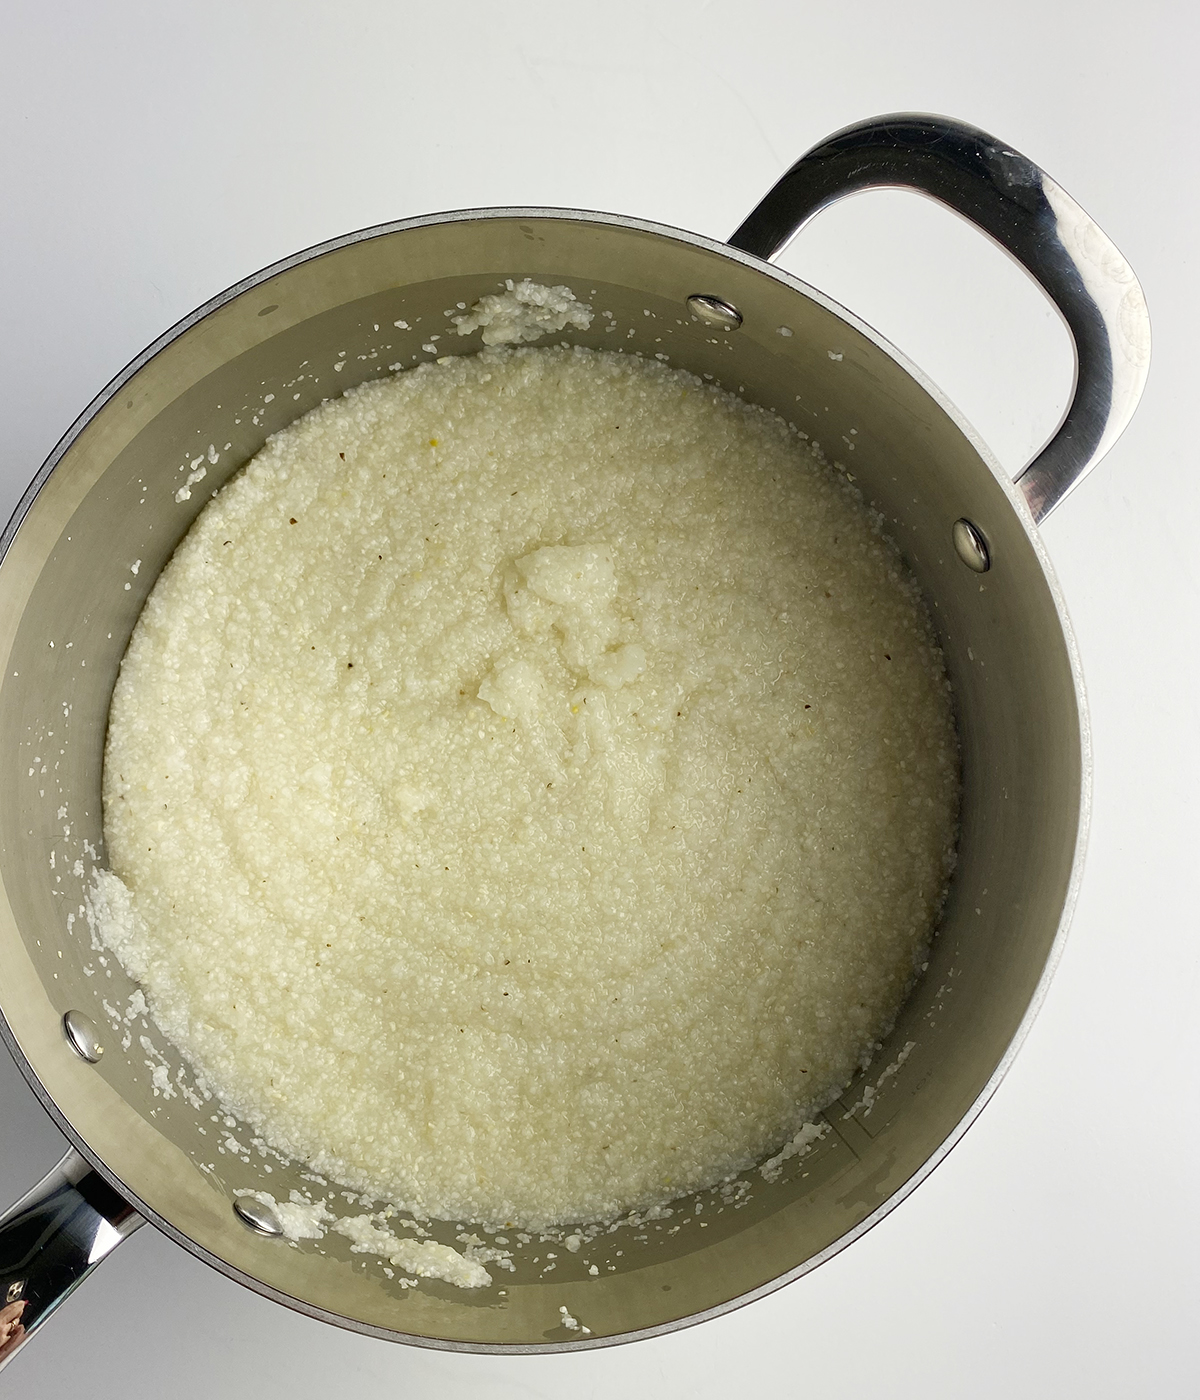 Cooked grits in a pot.